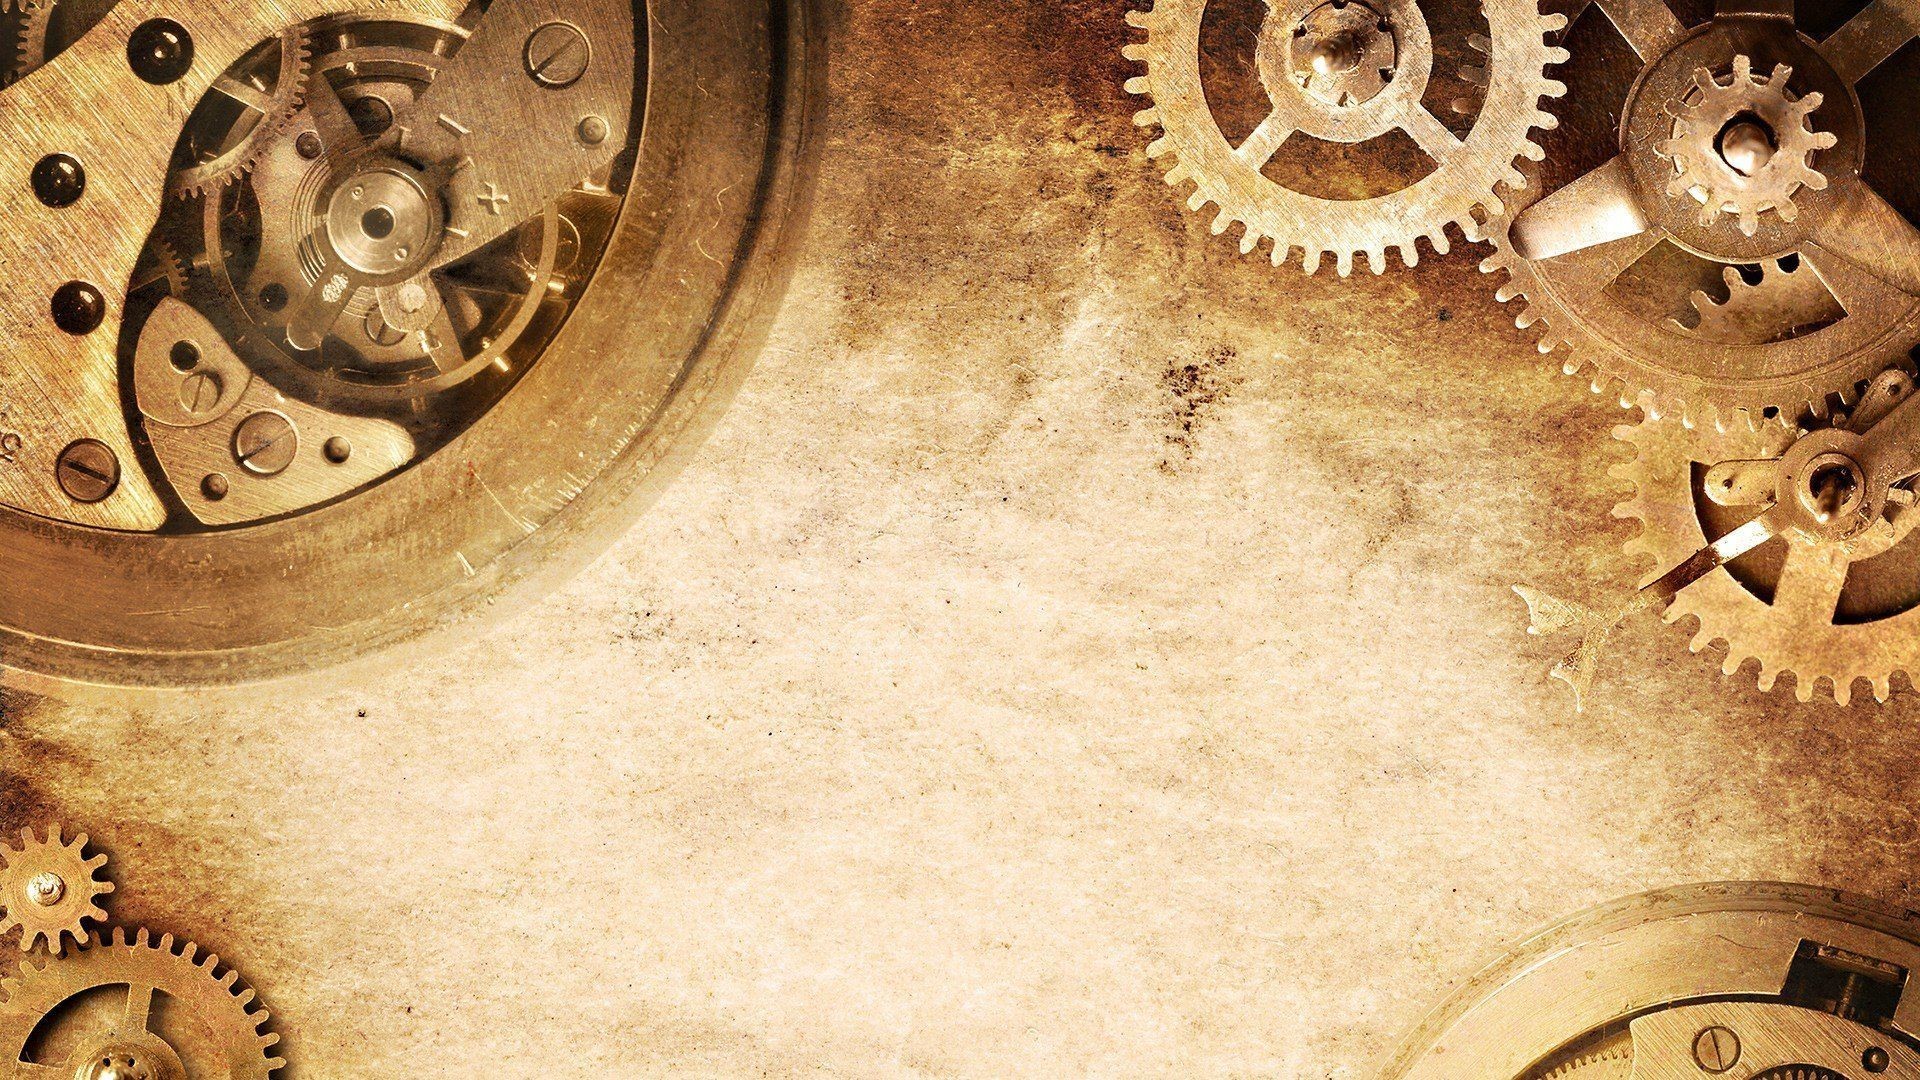 Mechanical Gears and Watches Wallpaper Mural, Custom Sizes Available –  Maughon's